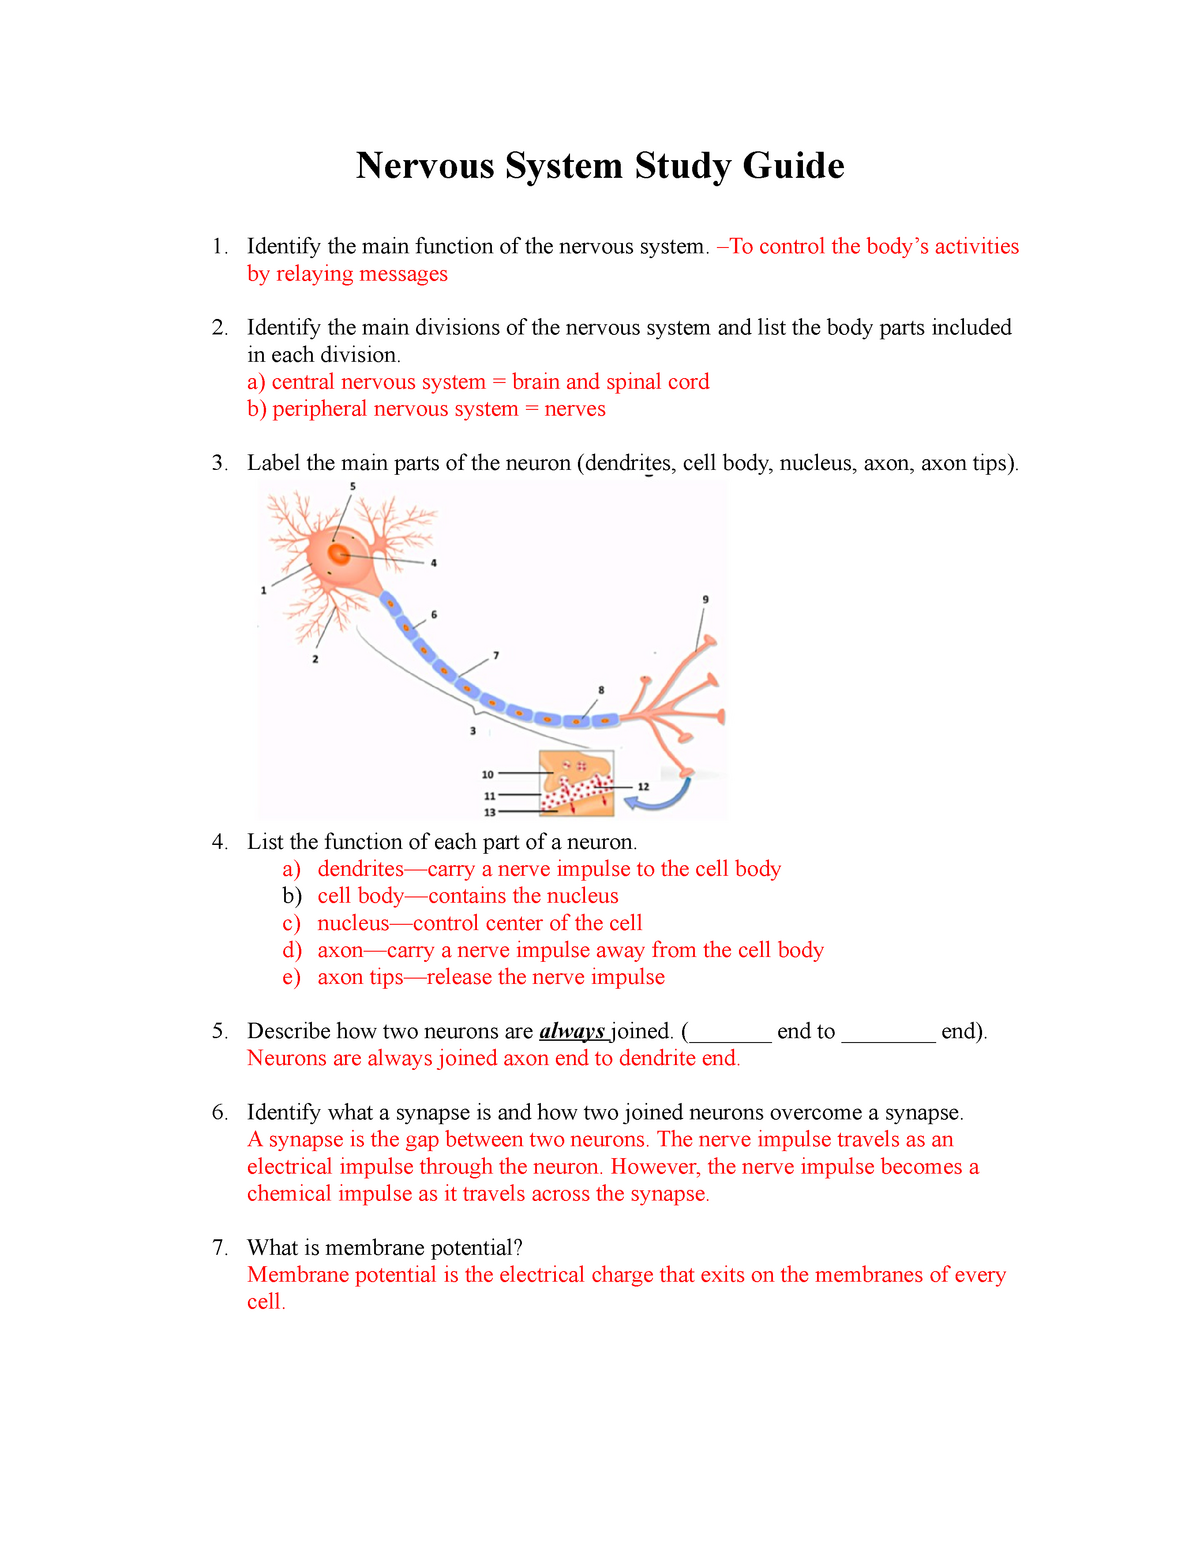 nervous system clinical case study answers